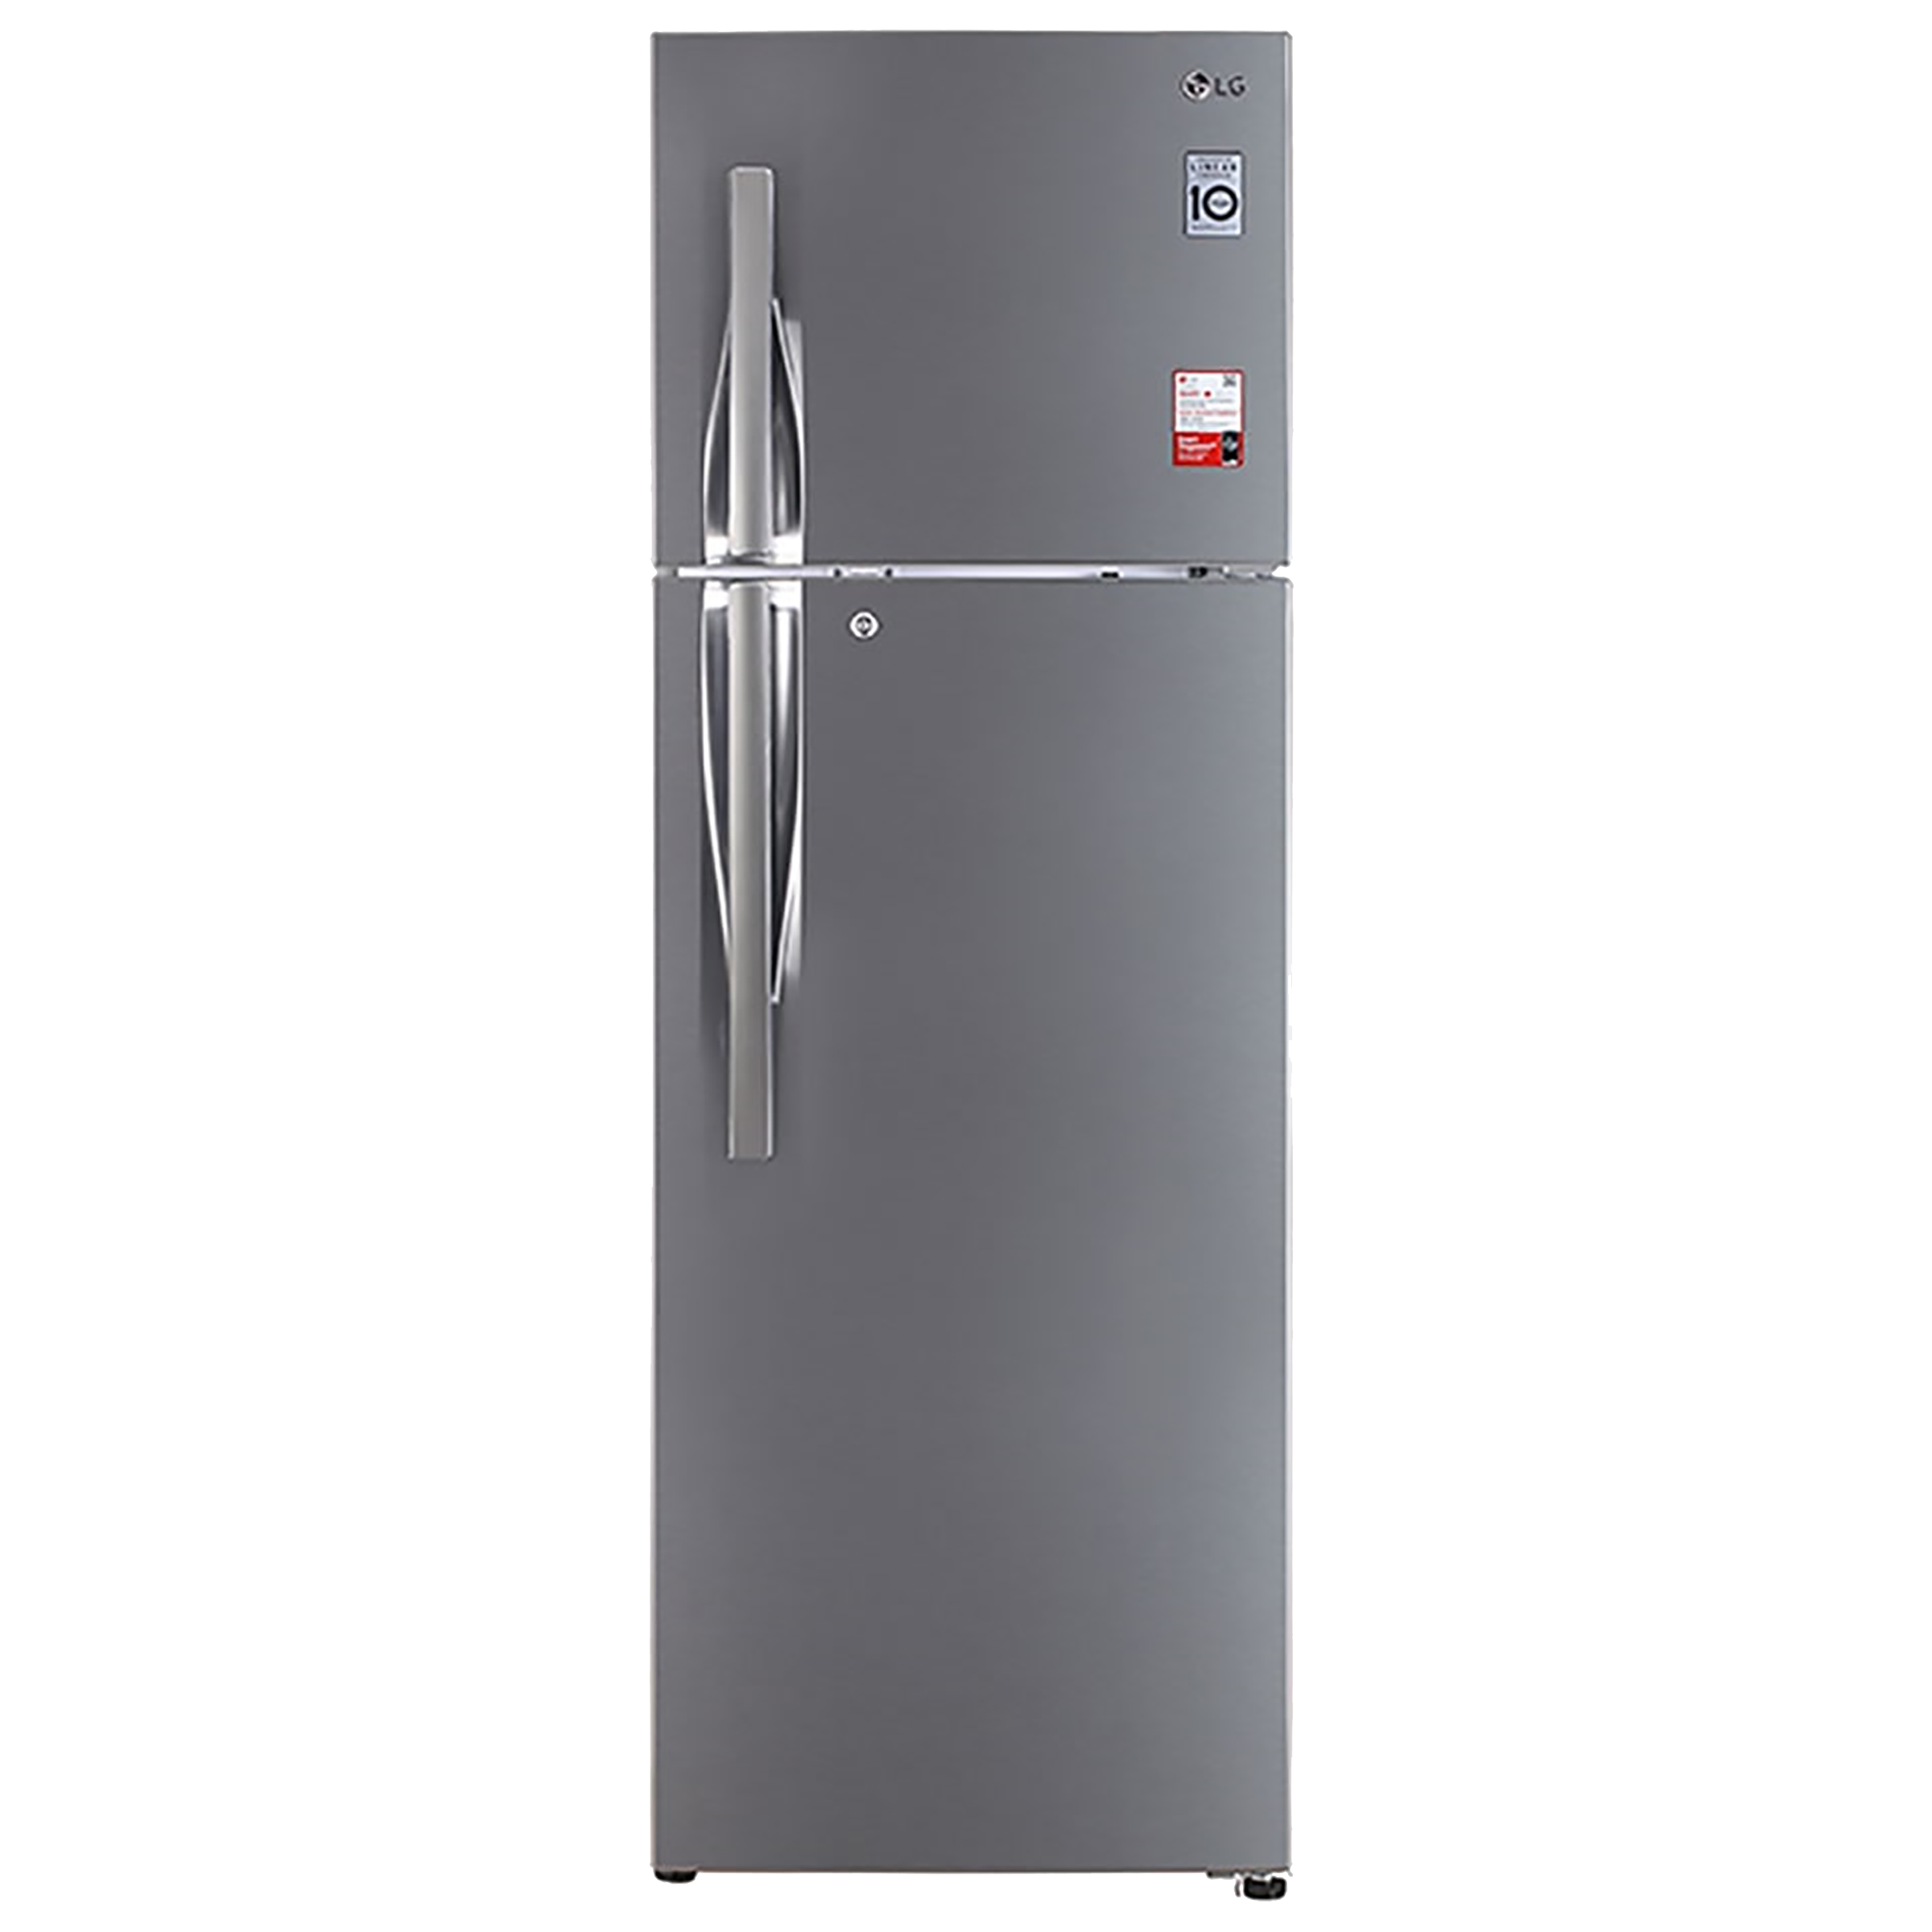 LG 360 Litres 2 Star Frost Free Inverter Double Door Refrigerator (Convertible Function, GL-S402RPZY.DPZZEB, Shiny Steel)_1